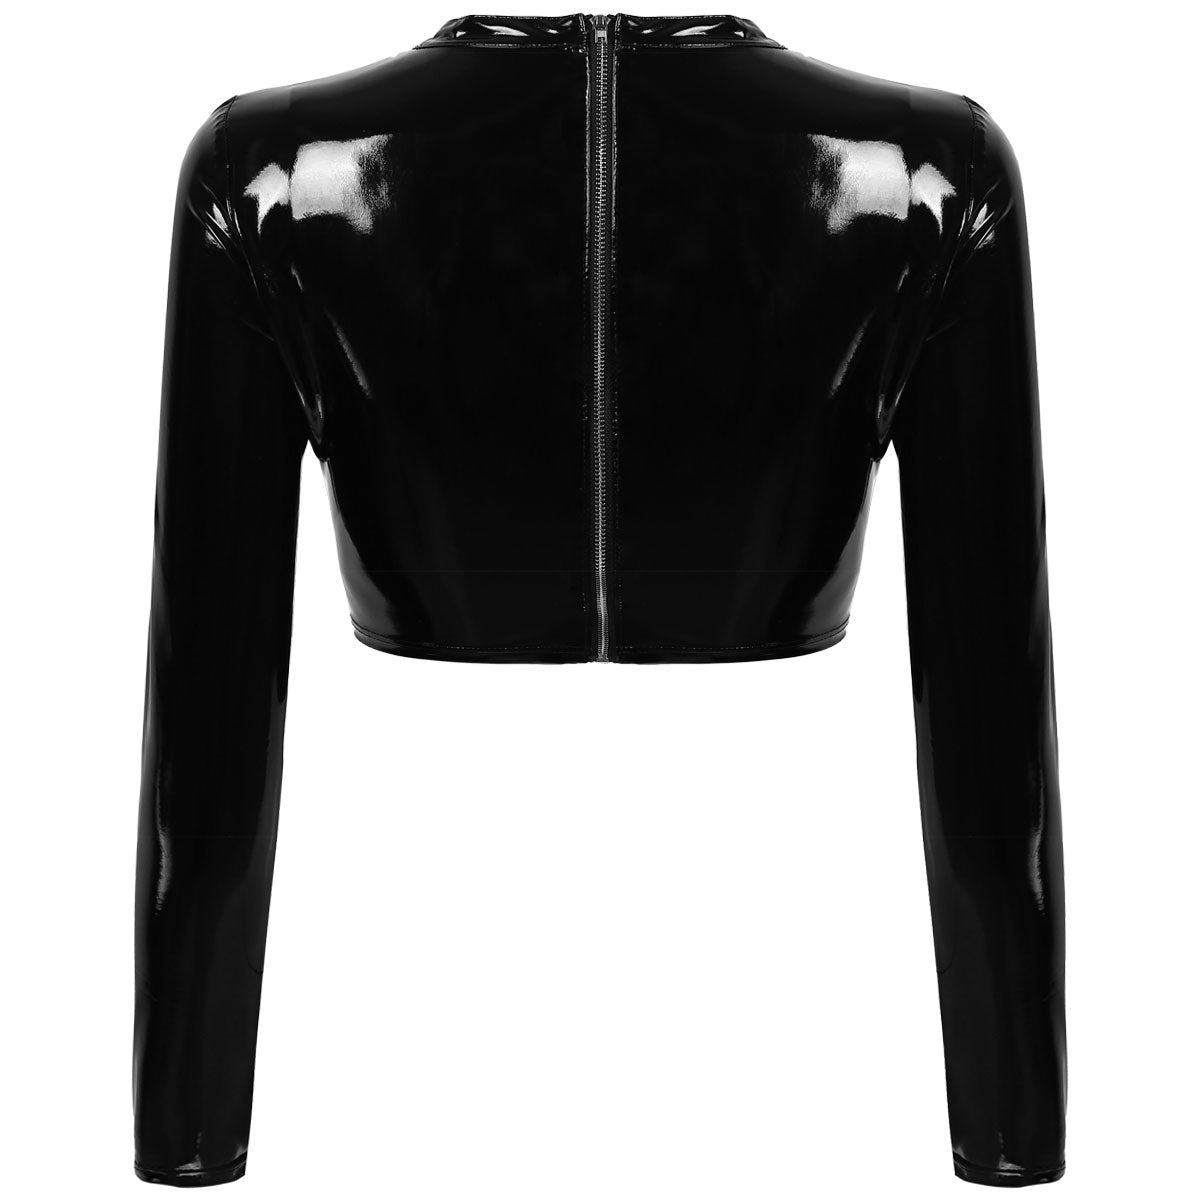 Cropped Patent Leather Top - Your Shiny Clothes